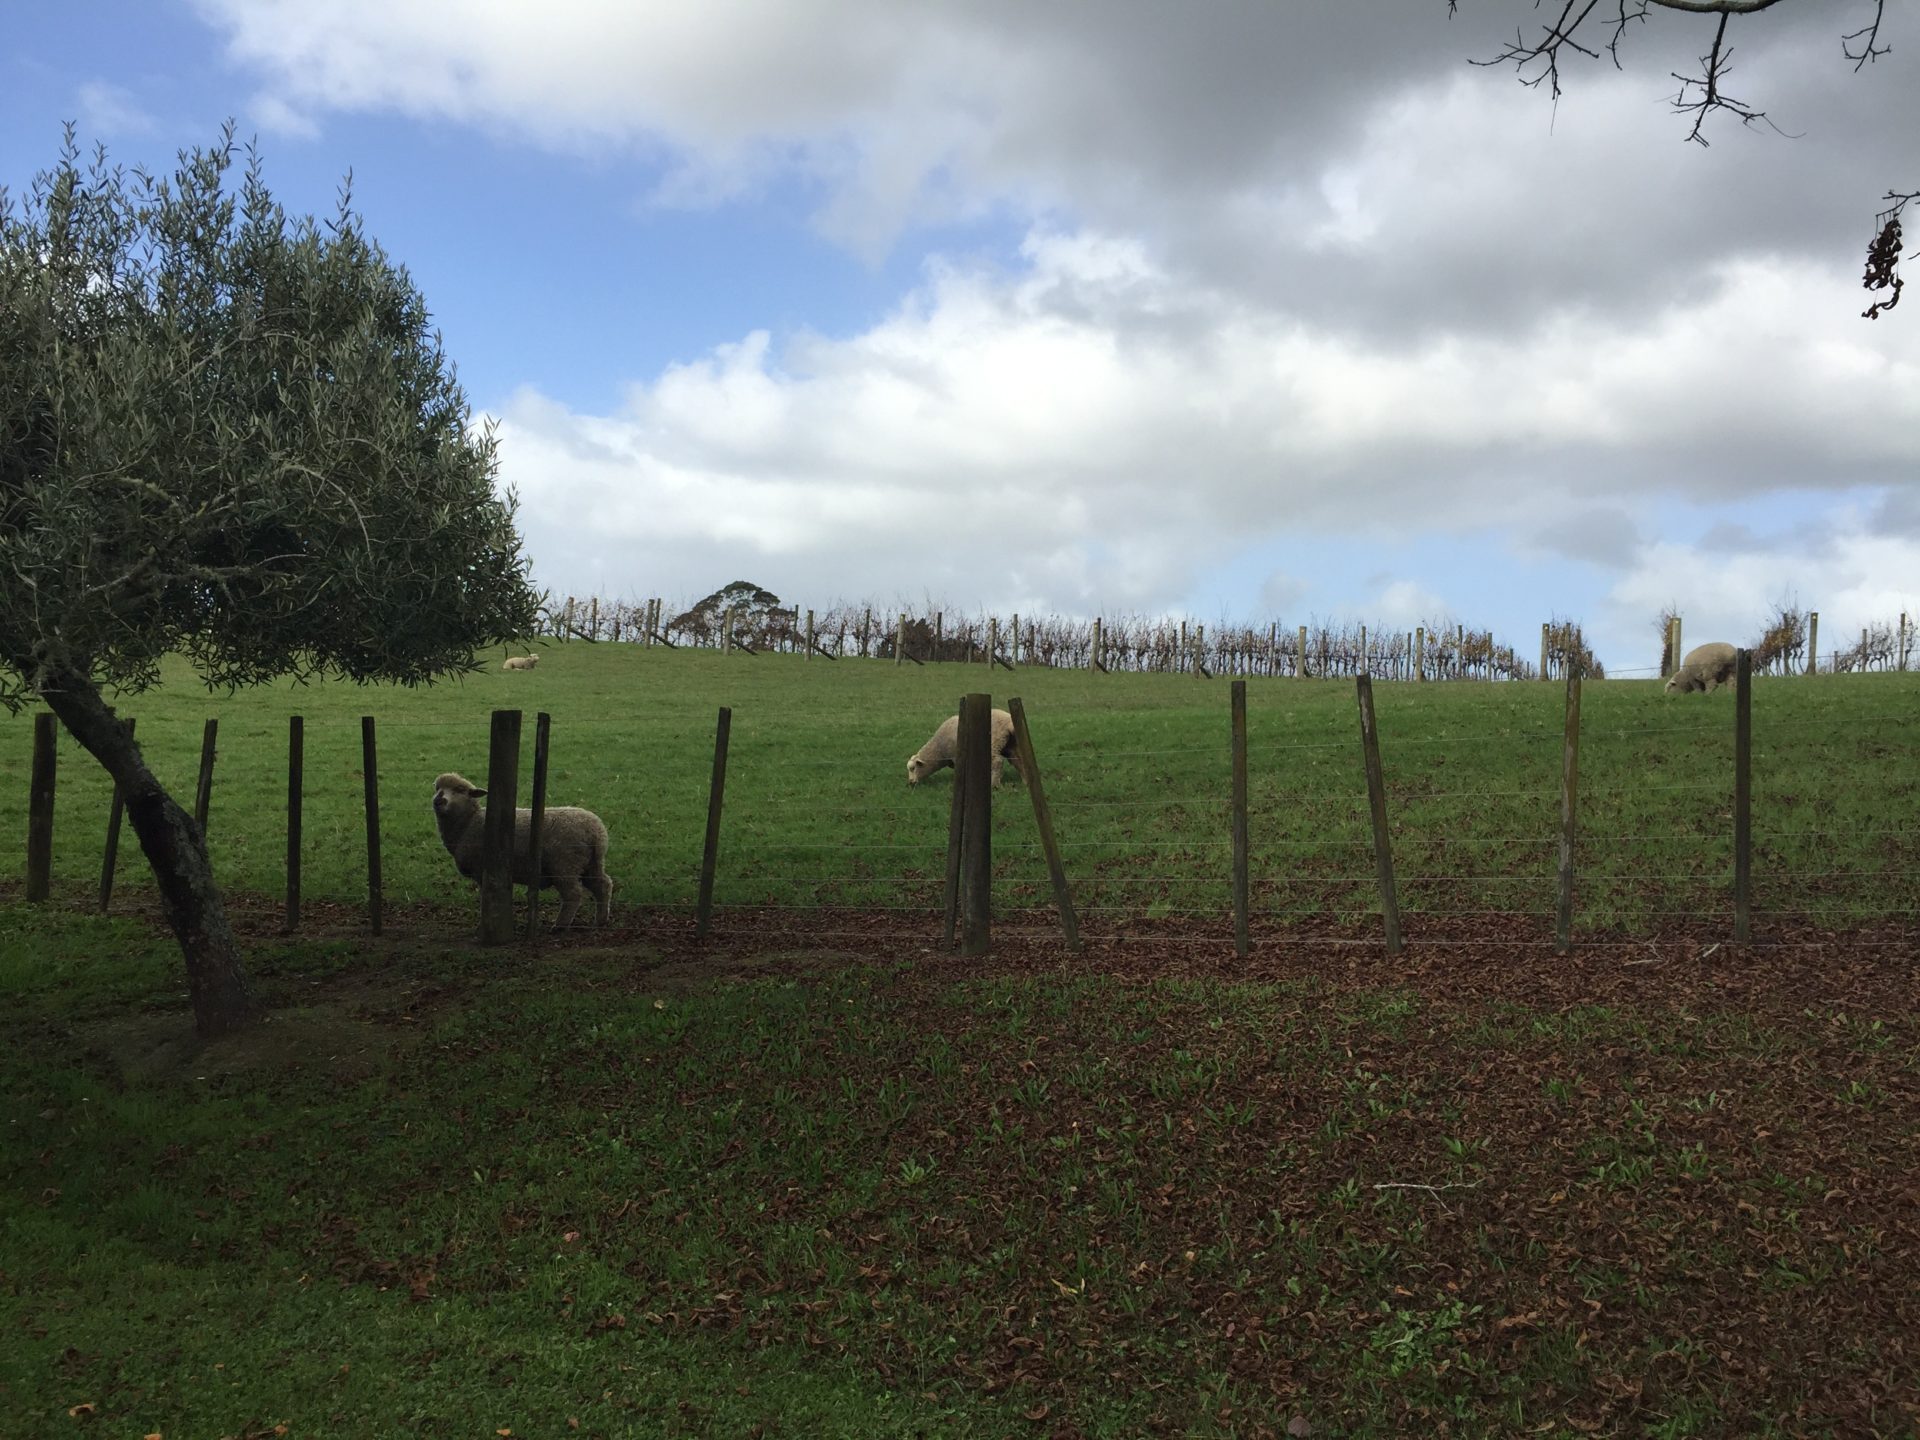 sheep in a fenced in field